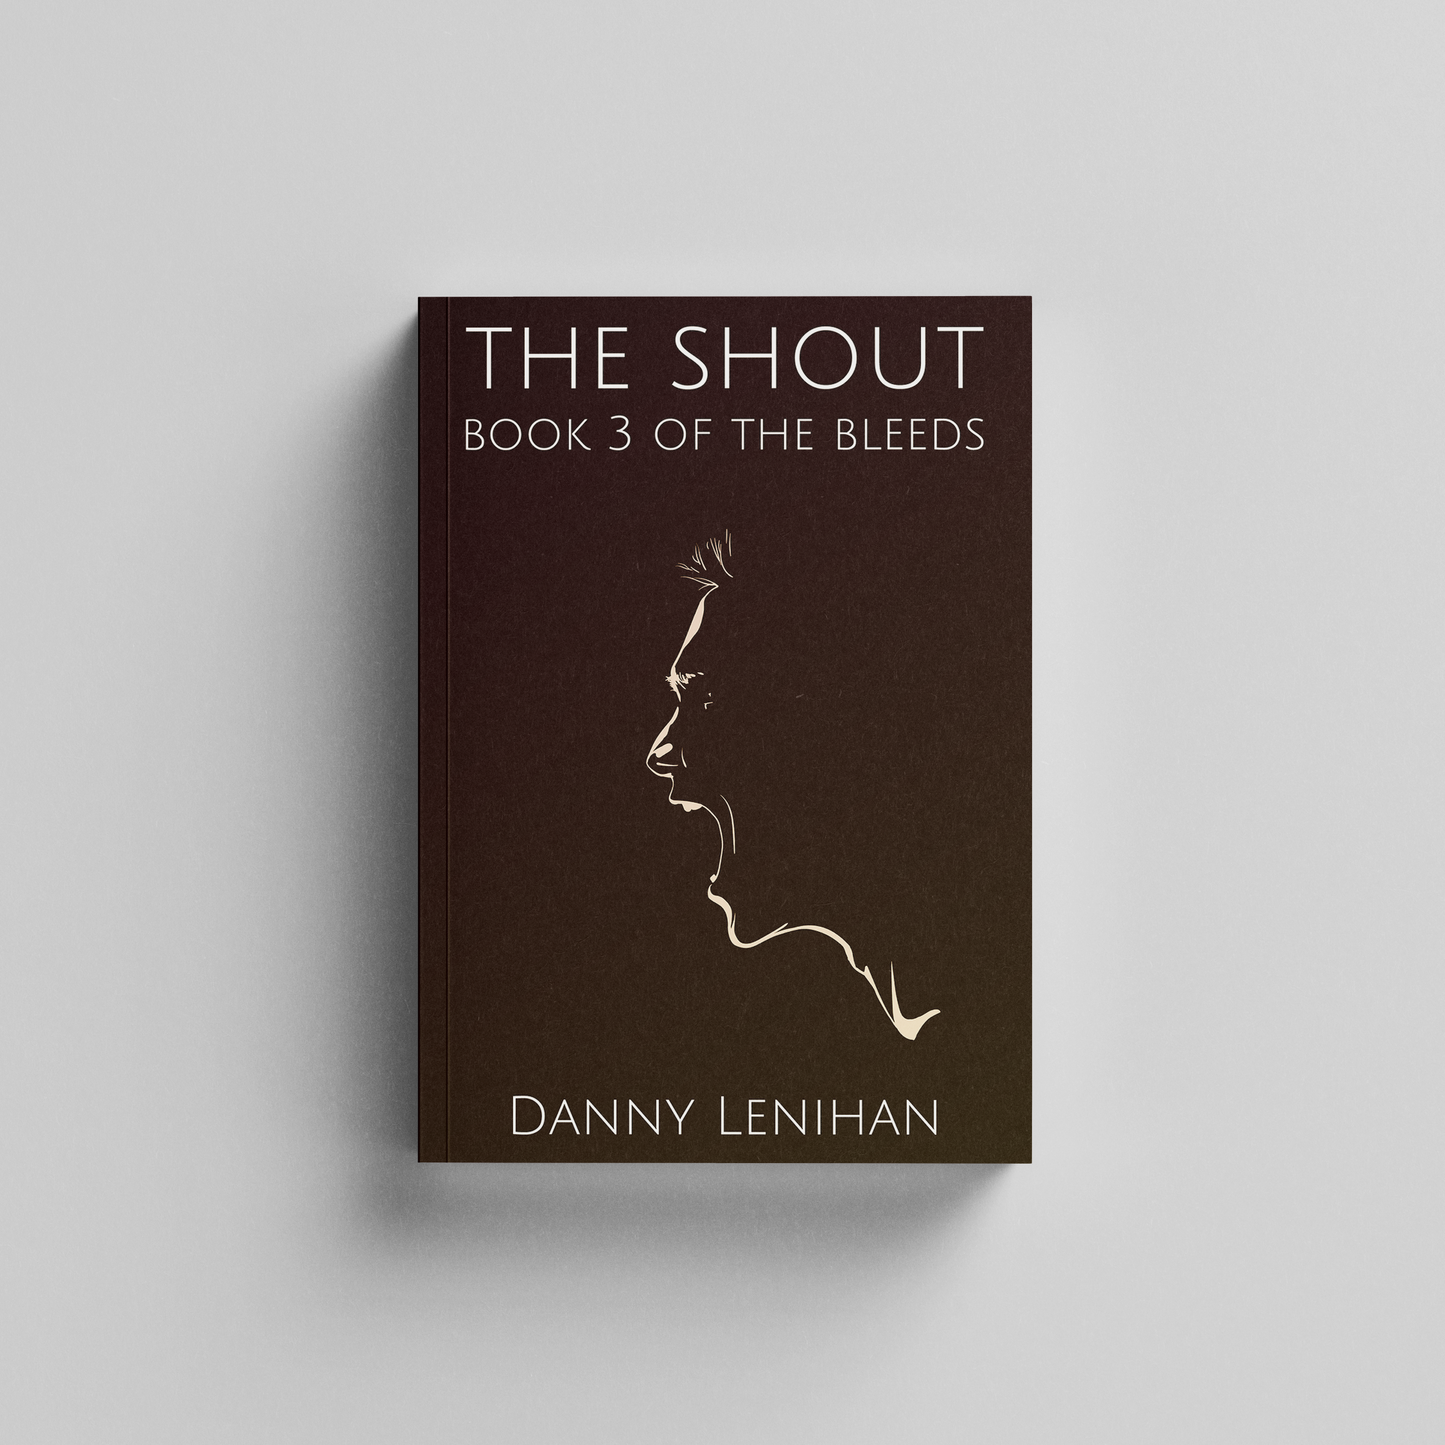 The Bleeds: Complete collection of dystopian shorts - eBook Edition